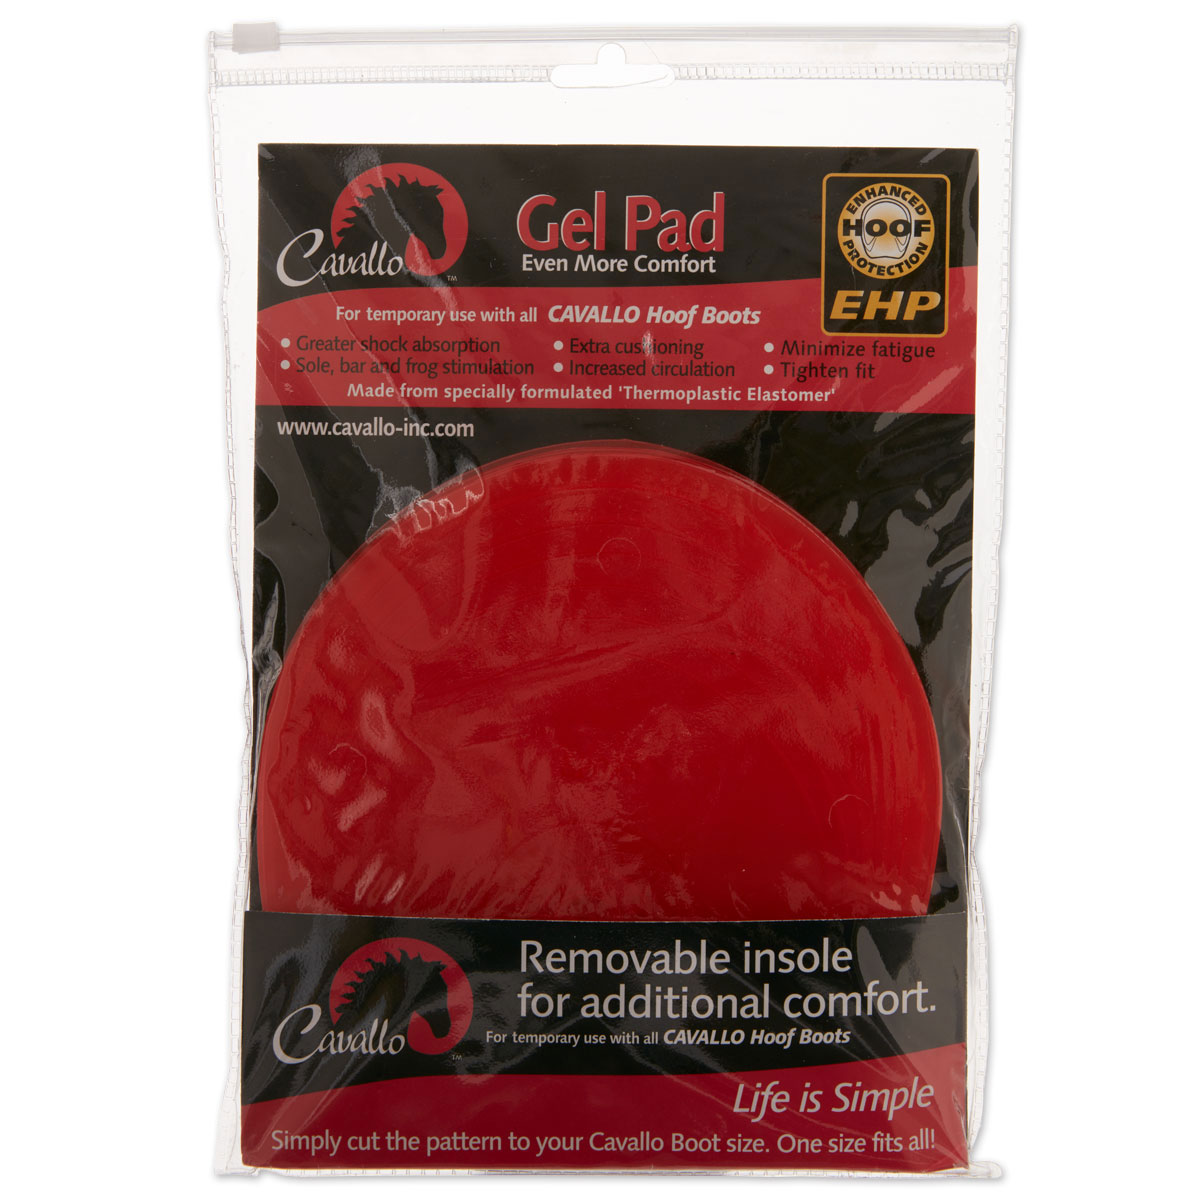 Cavallo Enhanced Protection Gel Pad for Horse Hoof Boot